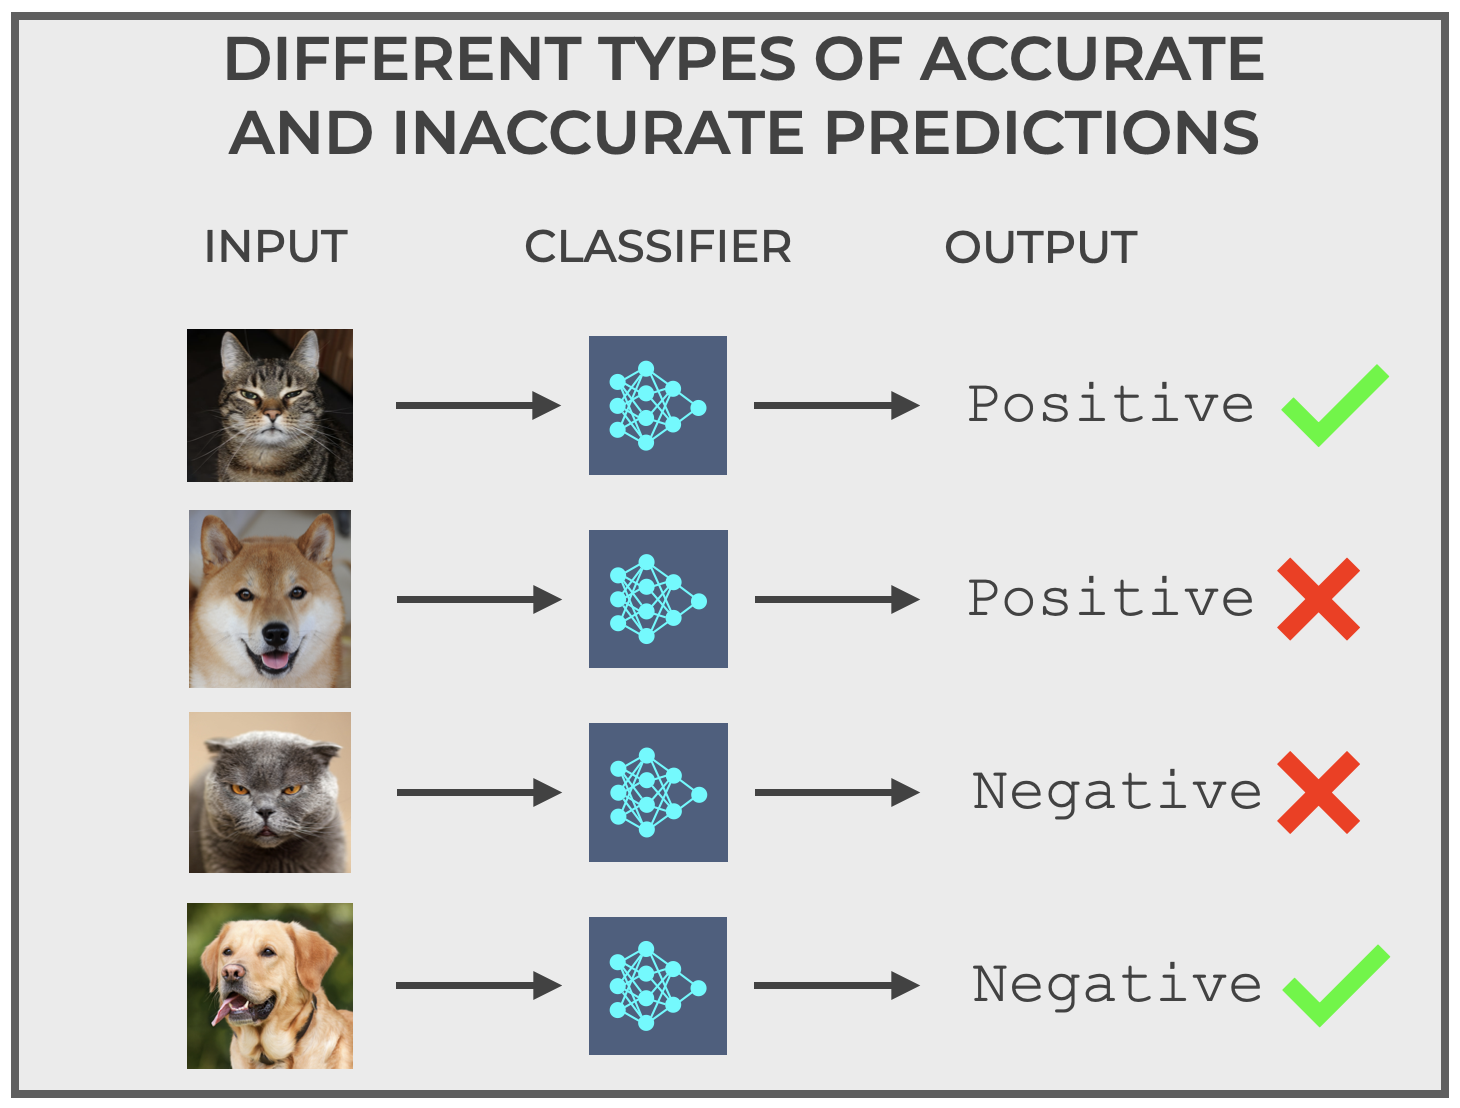 An image of different types of correct and incorrect predictions for our Cat Detector system.